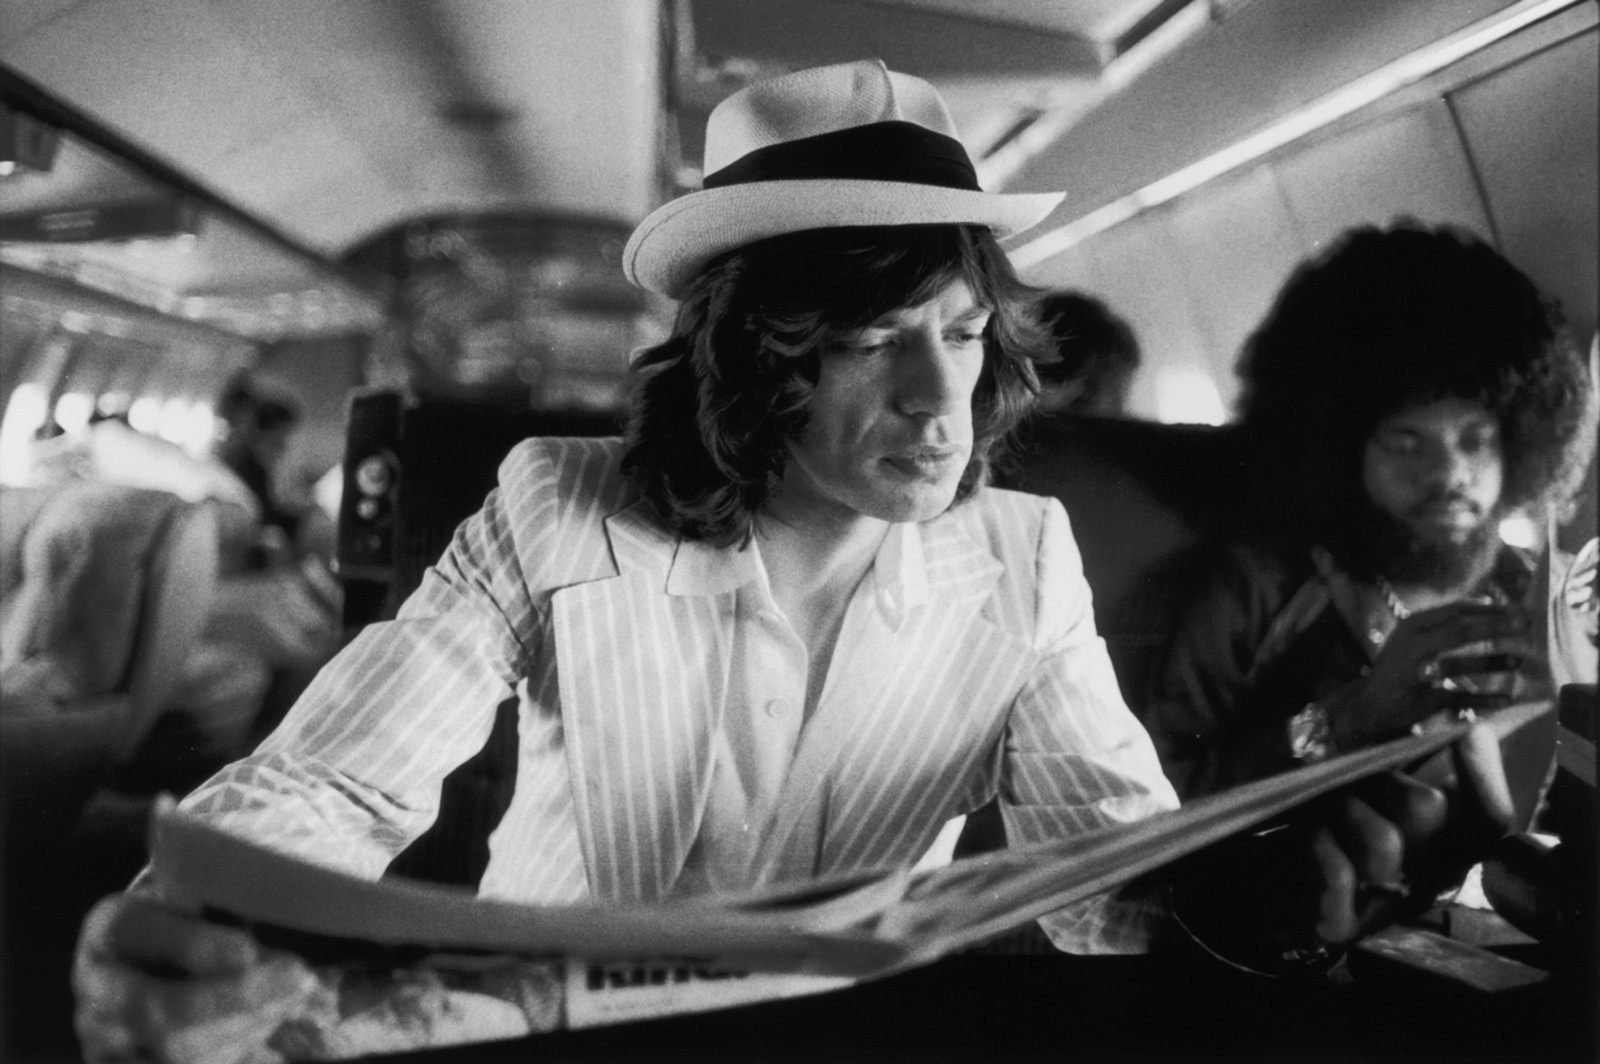 Mick Jagger and keyboardist Billy Preston on board the Rolling Stones’ private jet during their Tour of the Americas, 1975